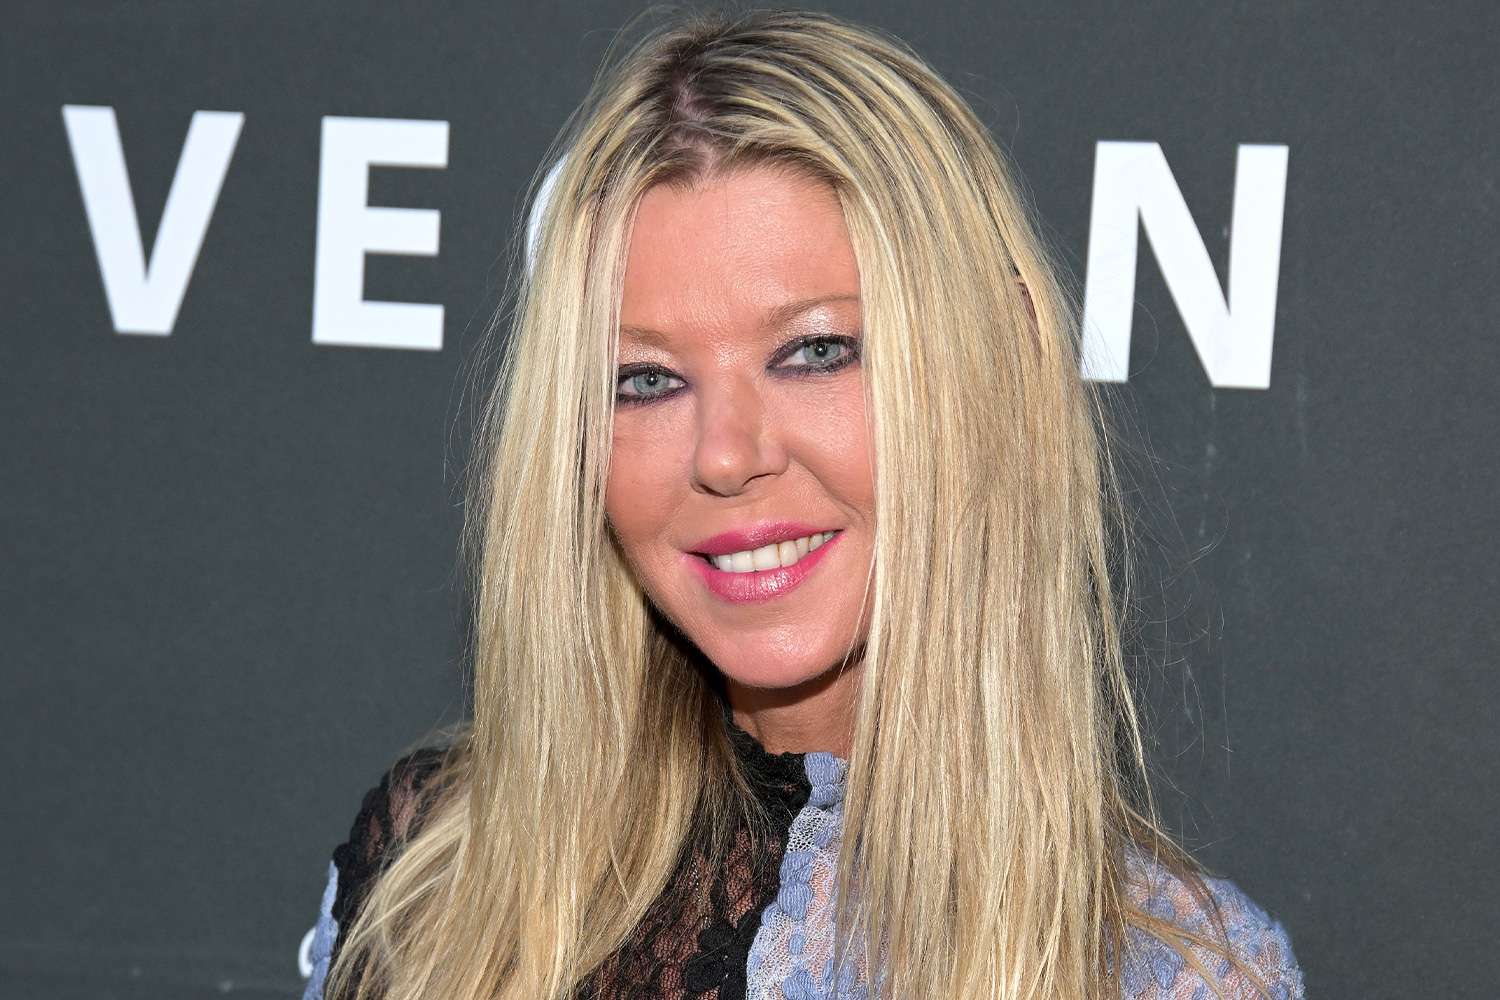 tara-reid-finds-inner-strength-and-hopes-to-return-to-special-forces